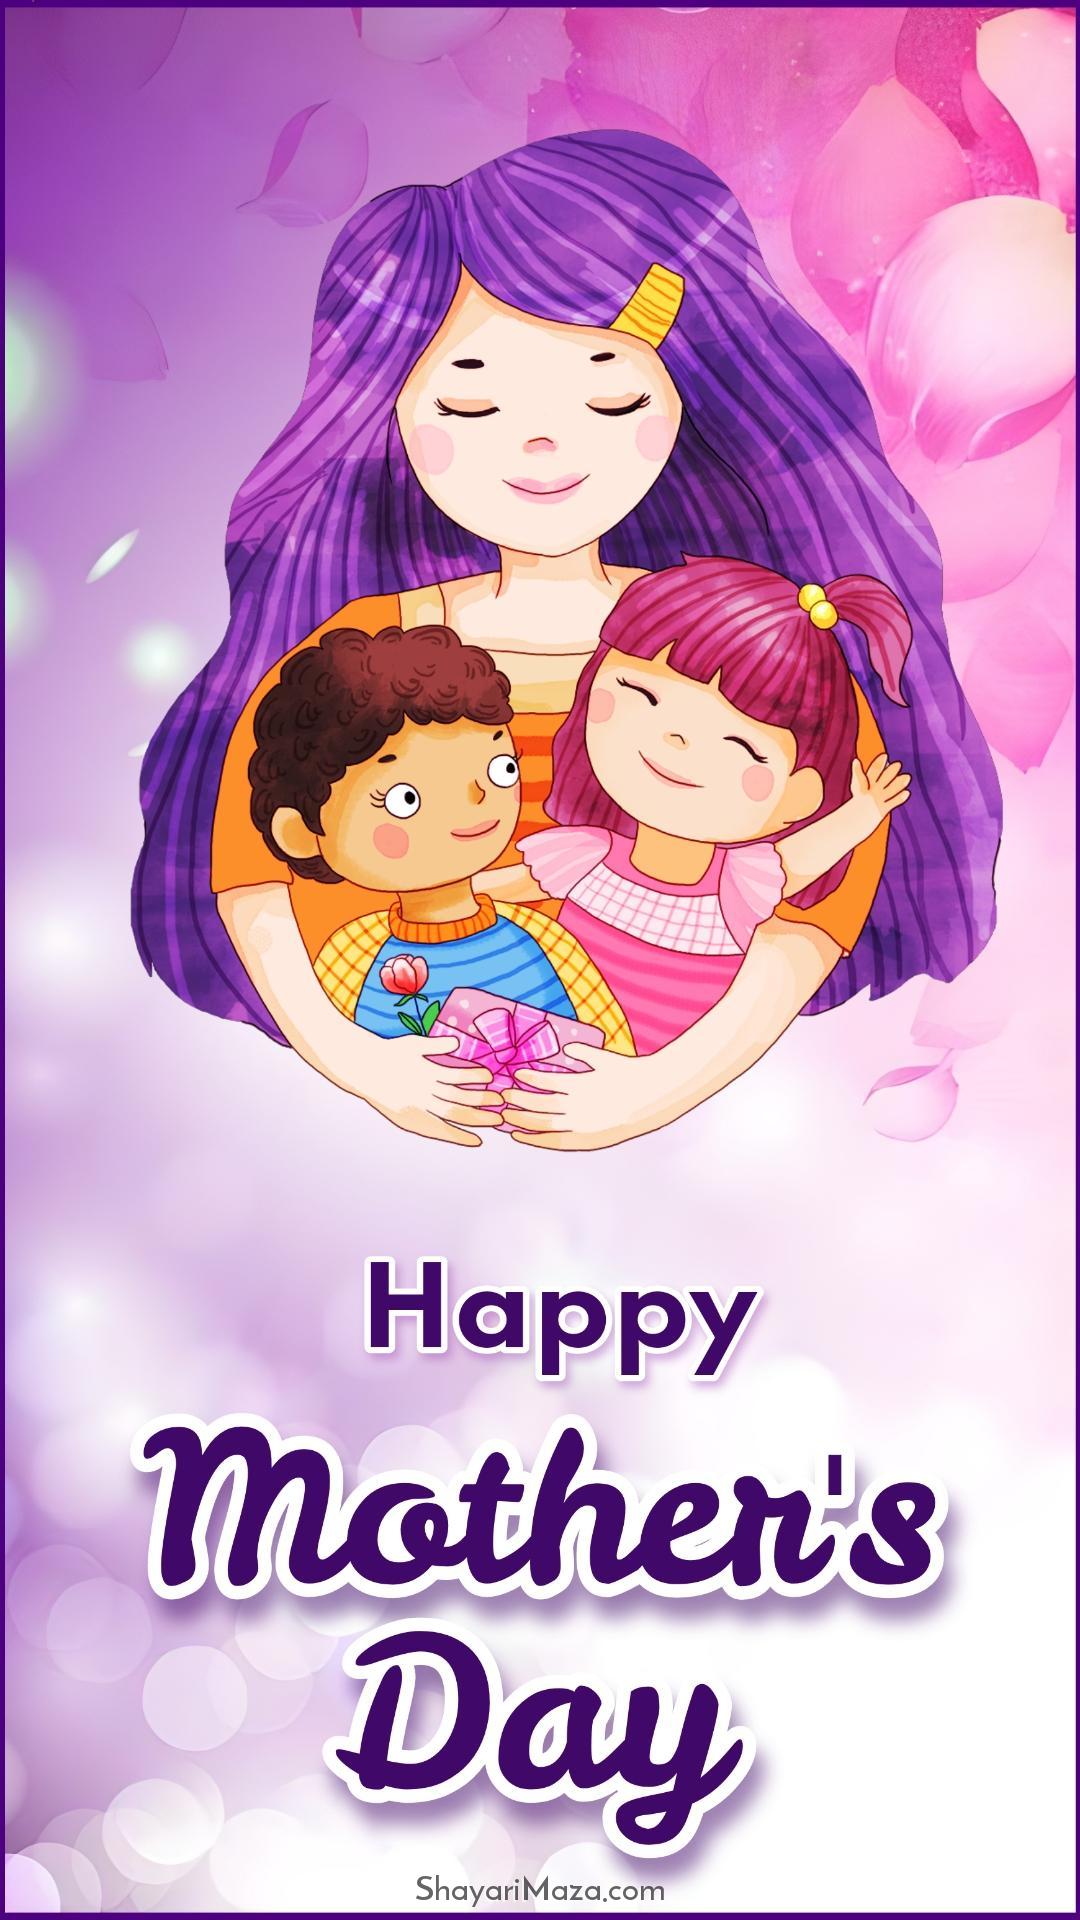 Happy Mothers Day Wallpaper Images Download